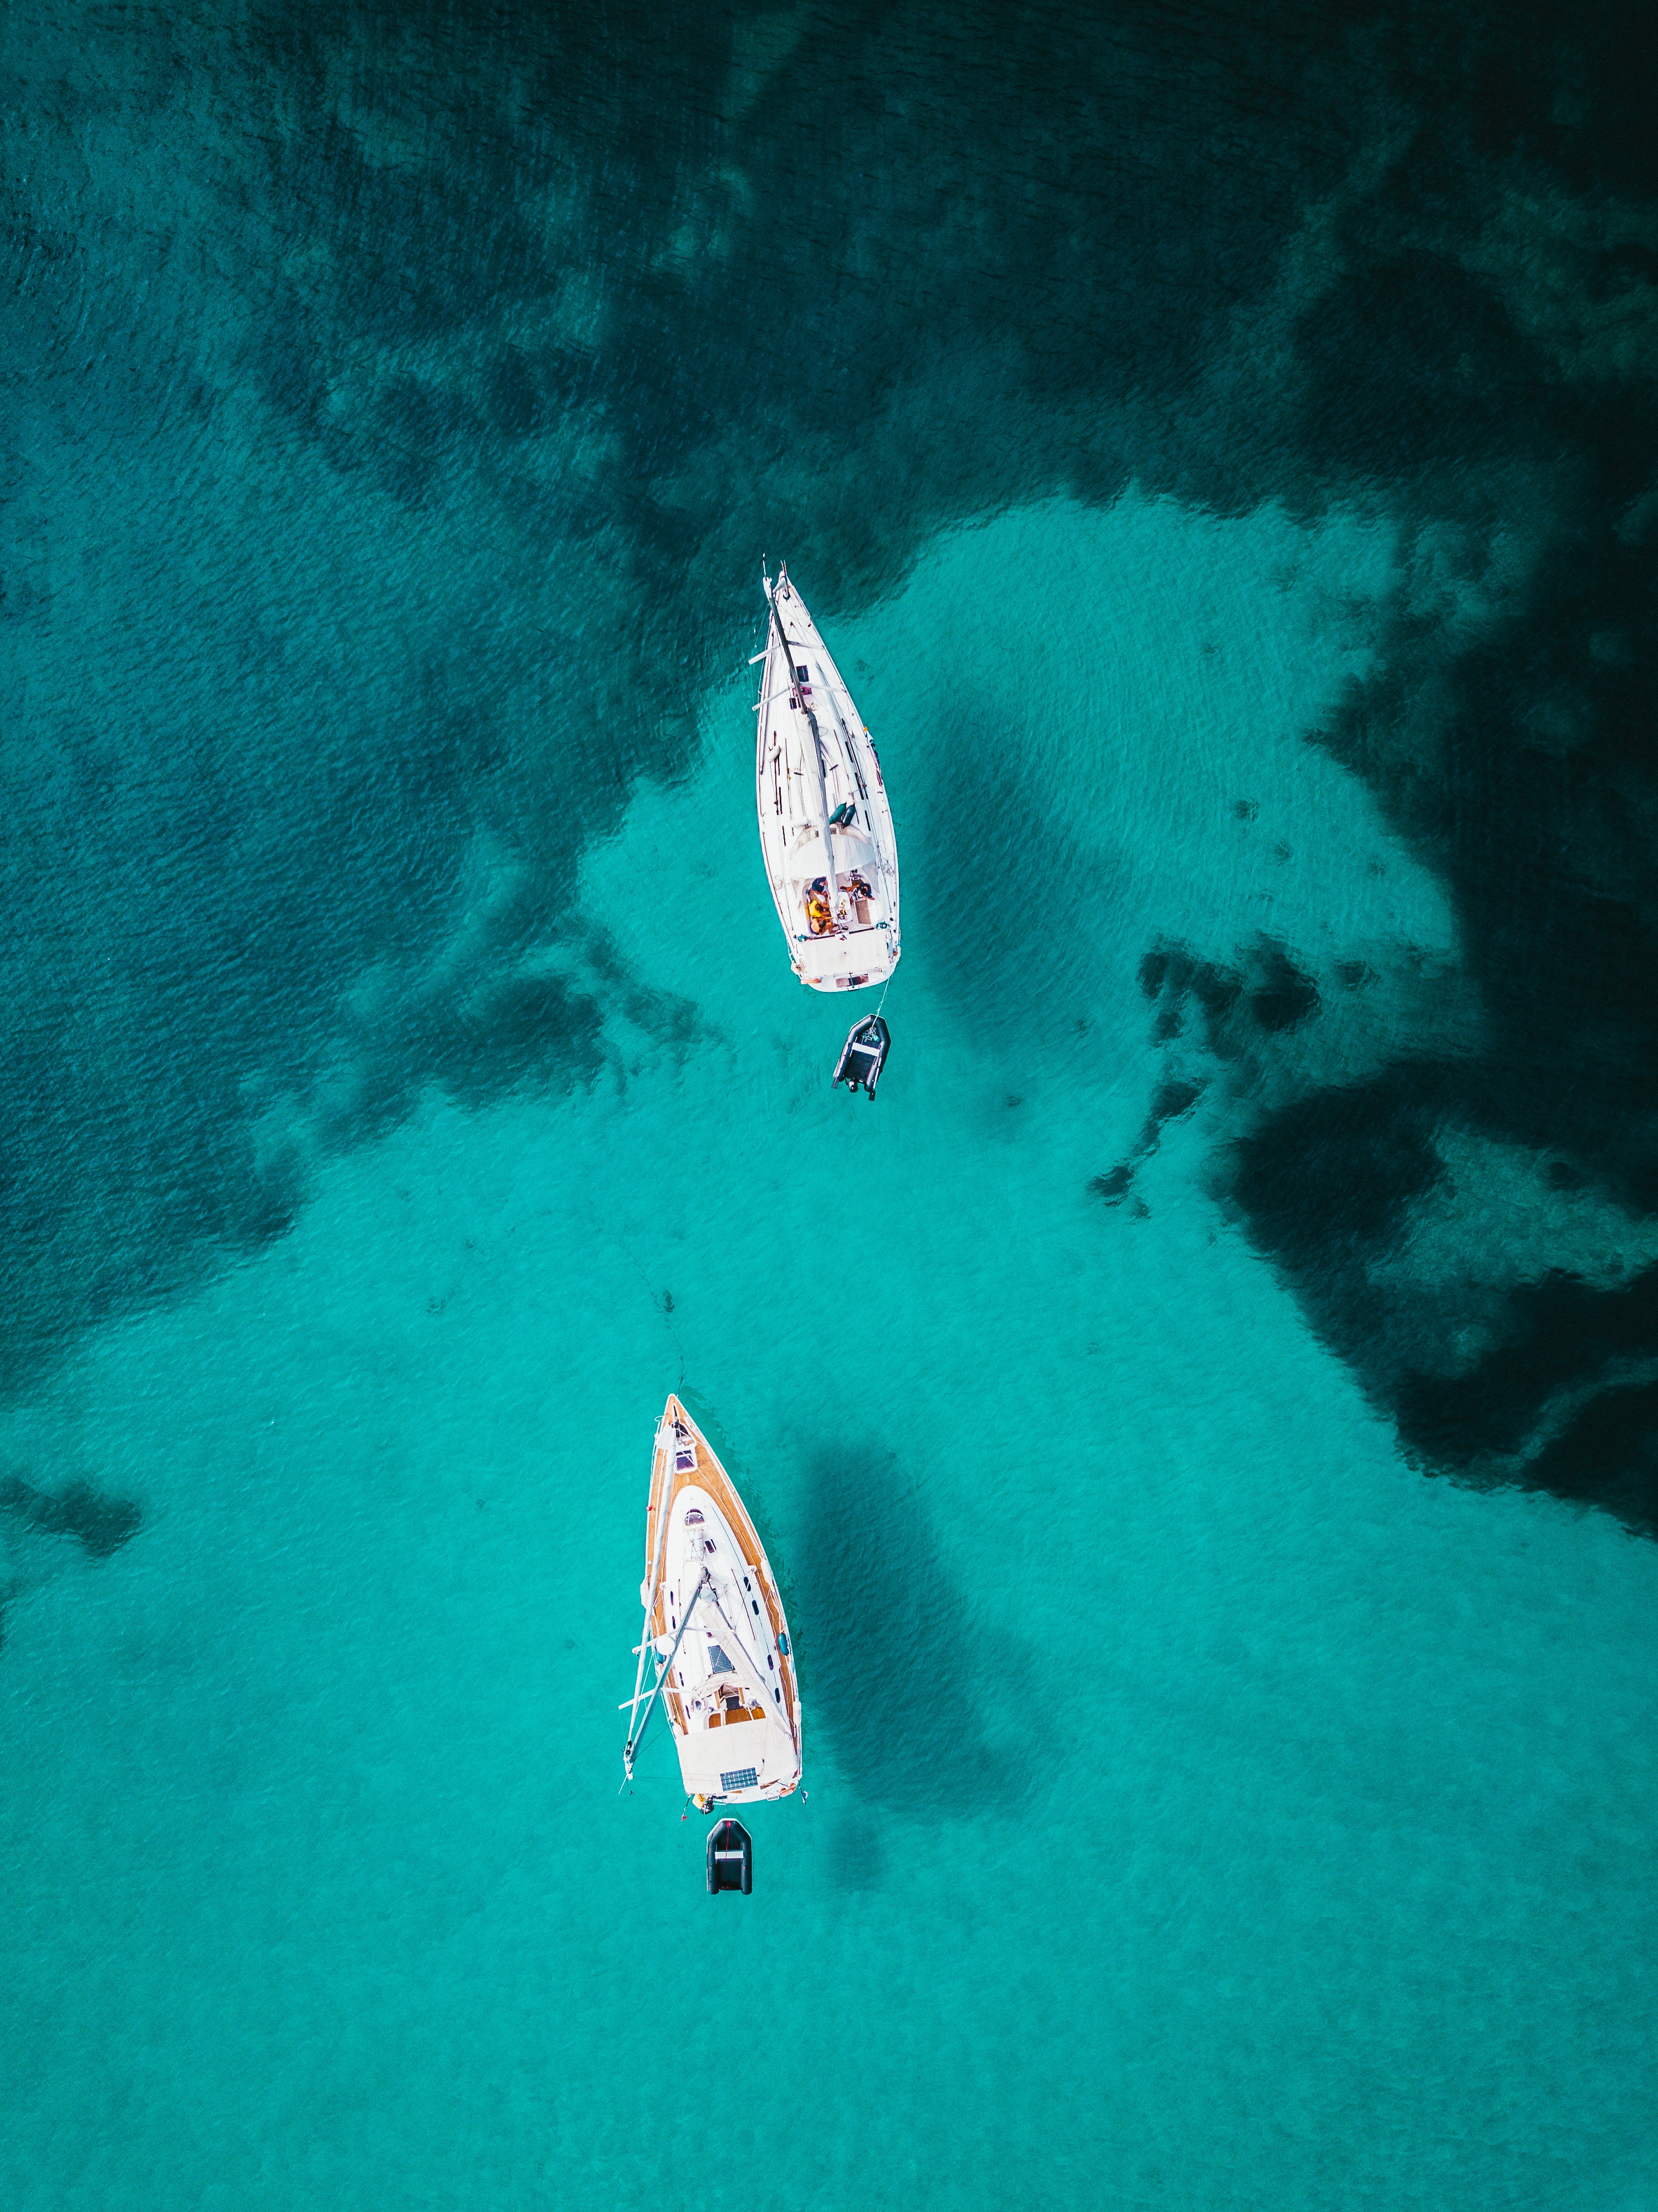 Free HD boats, nature, water, view from above, ocean